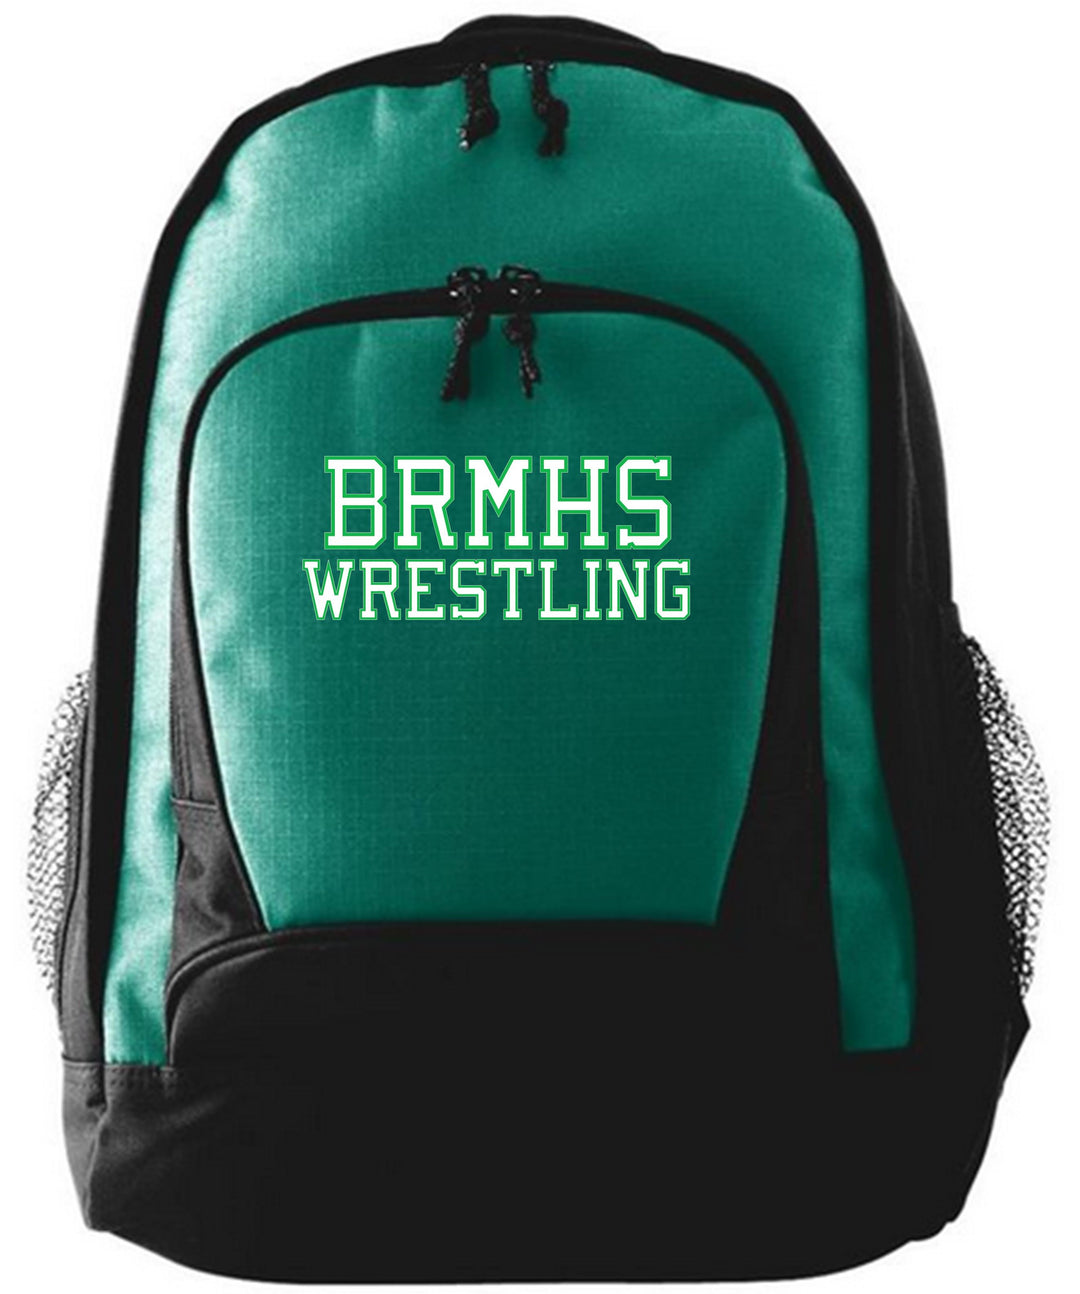 AUGUSTA BRMHS WRESTLING RIPSTOP BACKPACK Bags   - Third Coast Soccer